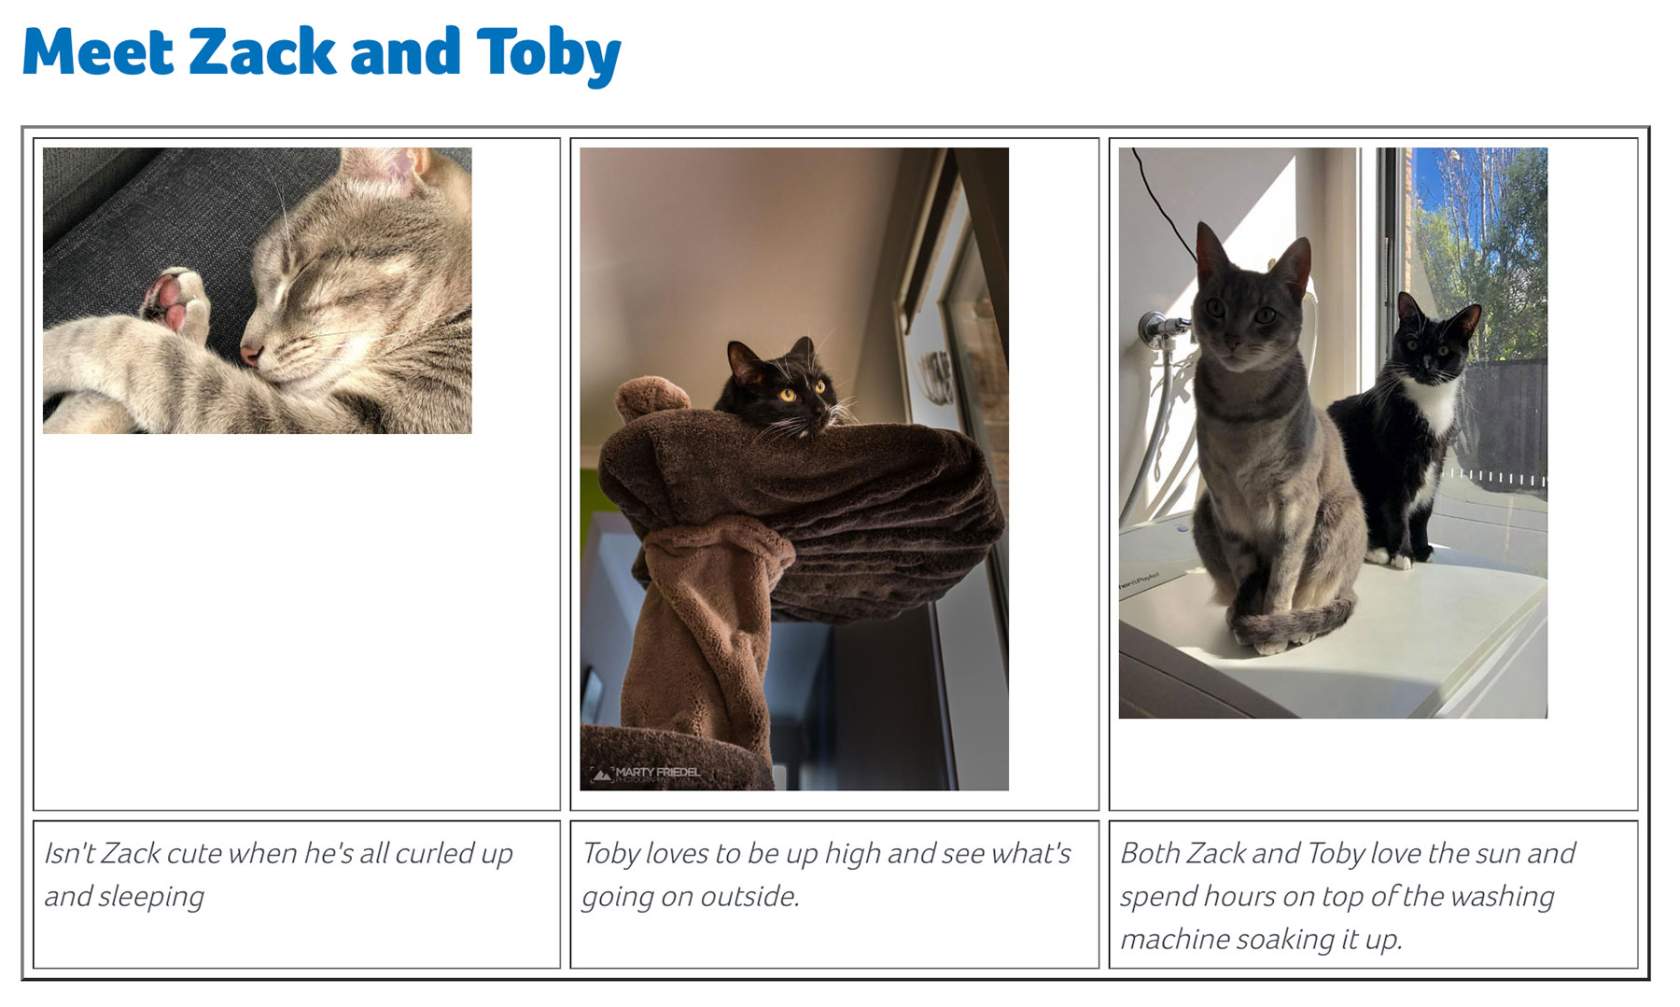 An example of a page layout with cat images in one row, and captions in another row